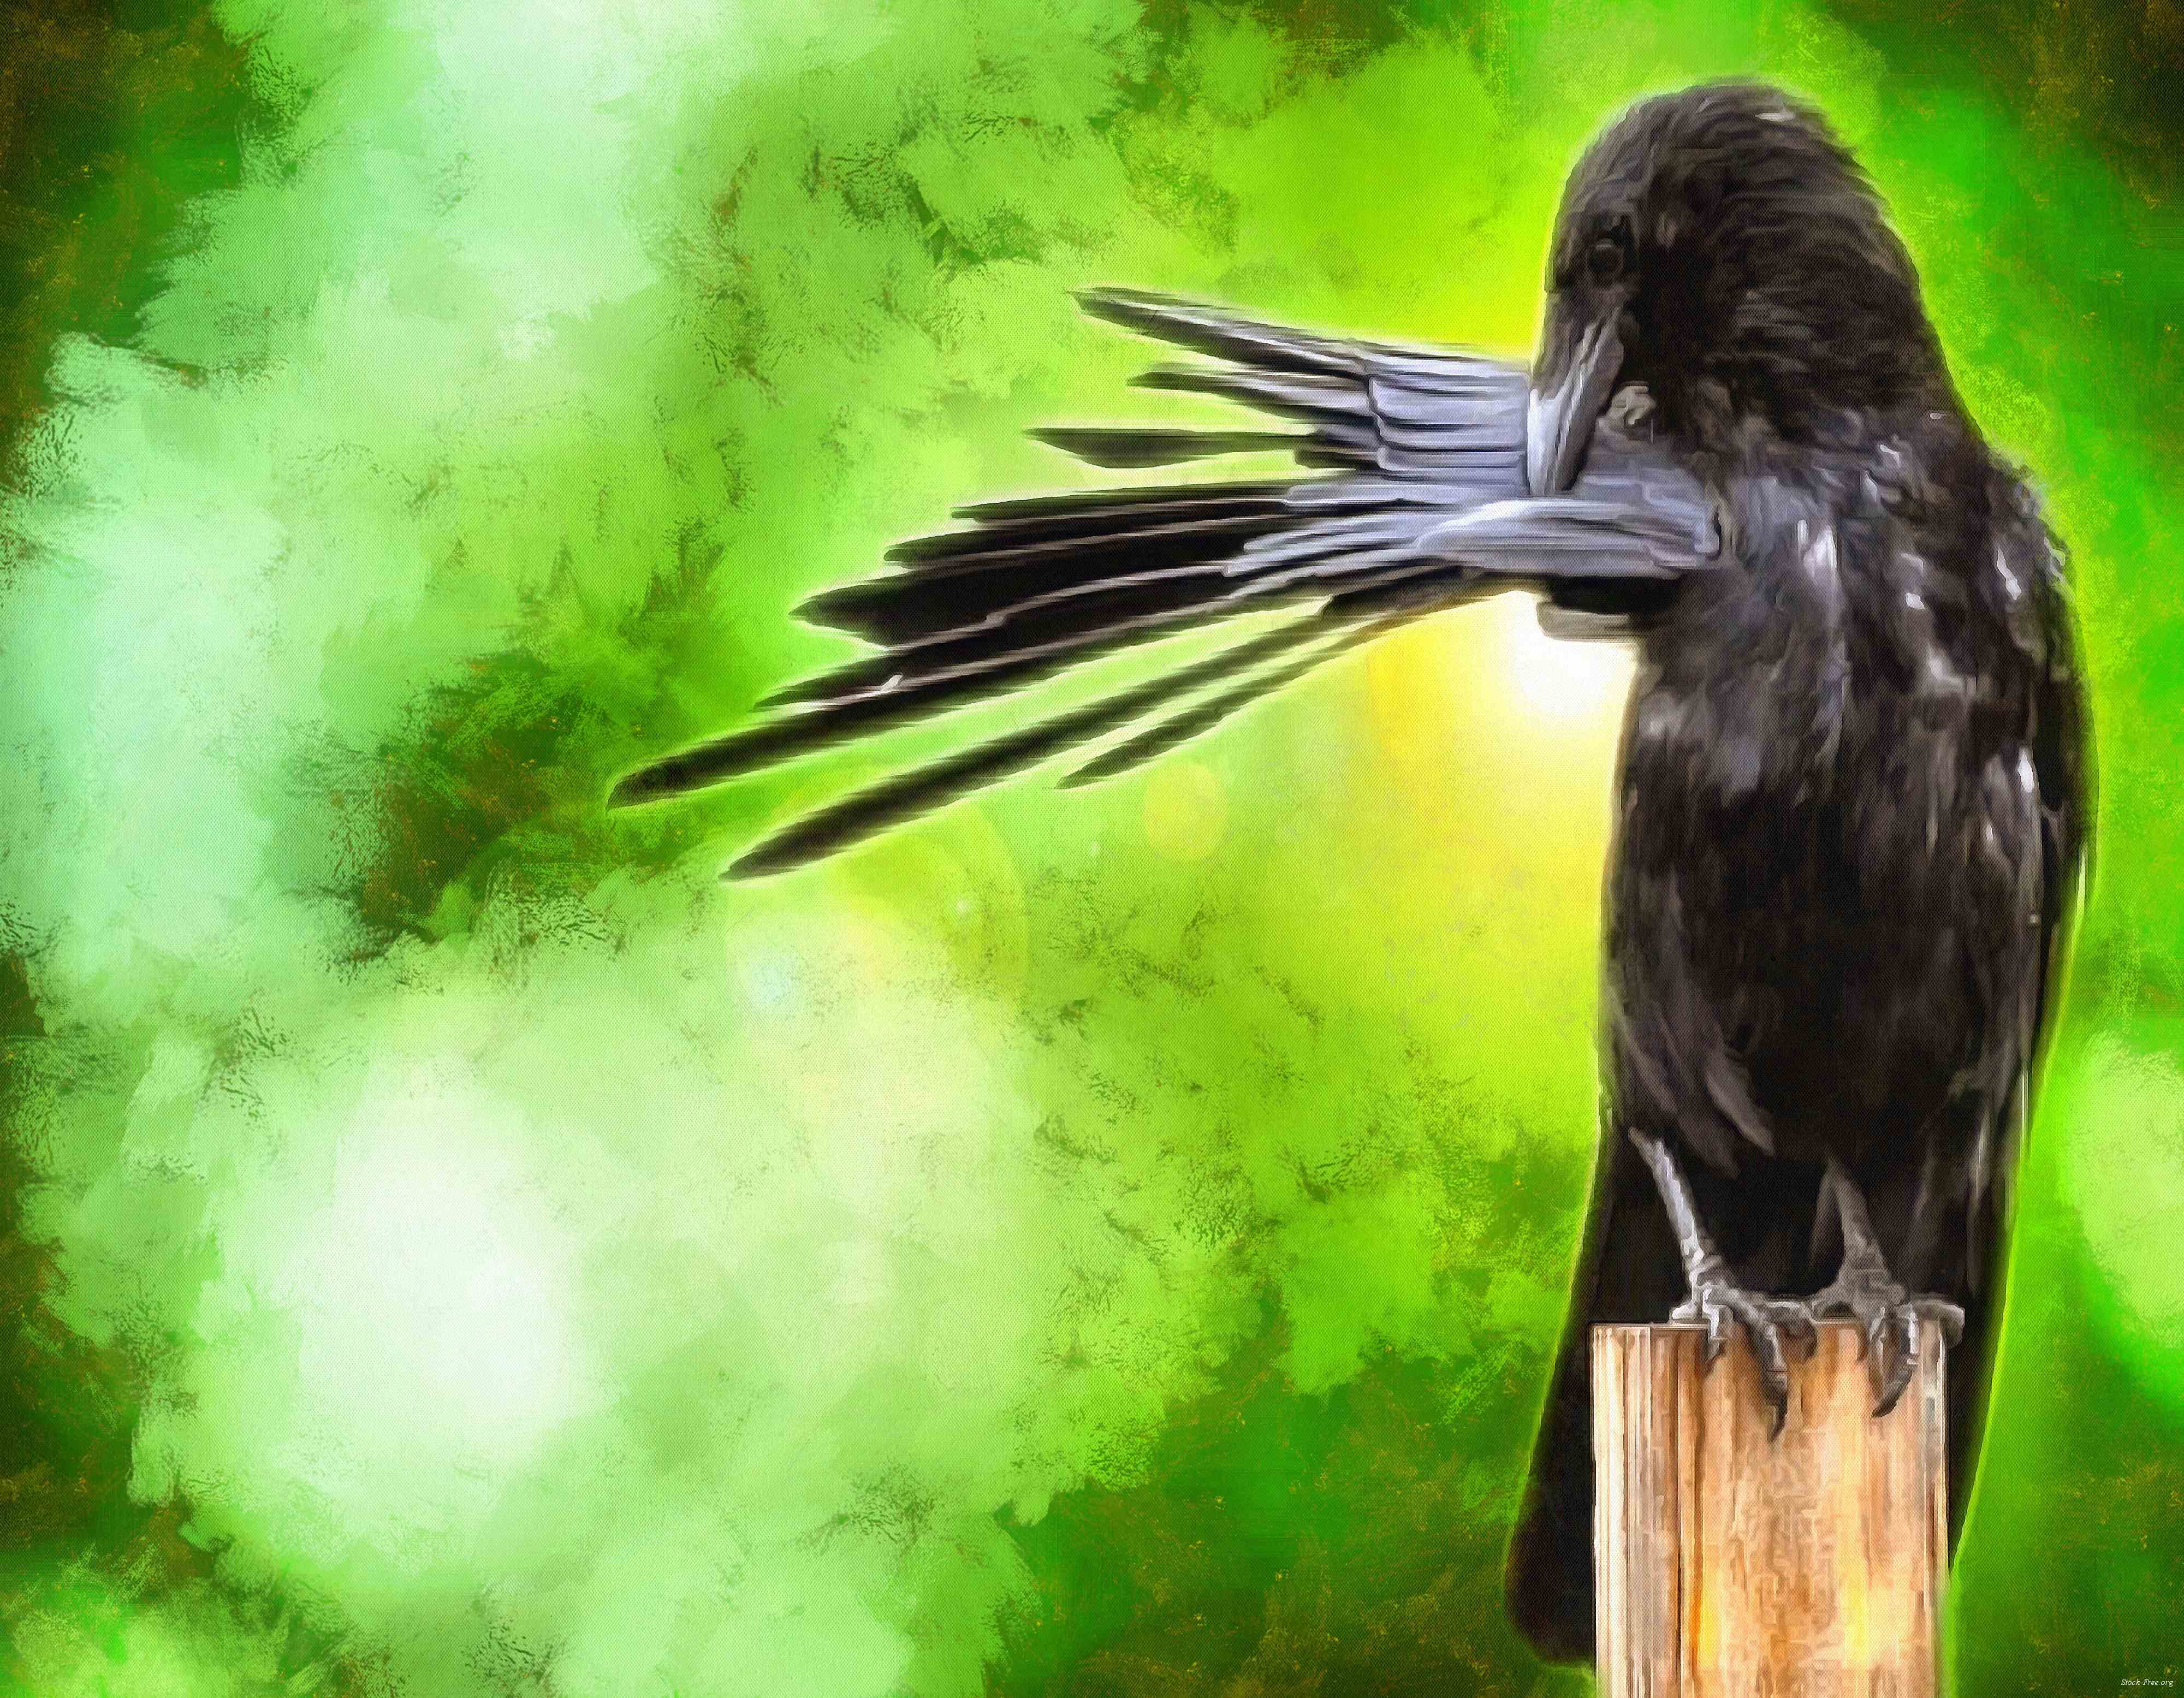 crow, flying, bird, birds, feathers, halloween, -  stock free photos, public domain images, download free images, free stock images, public domain